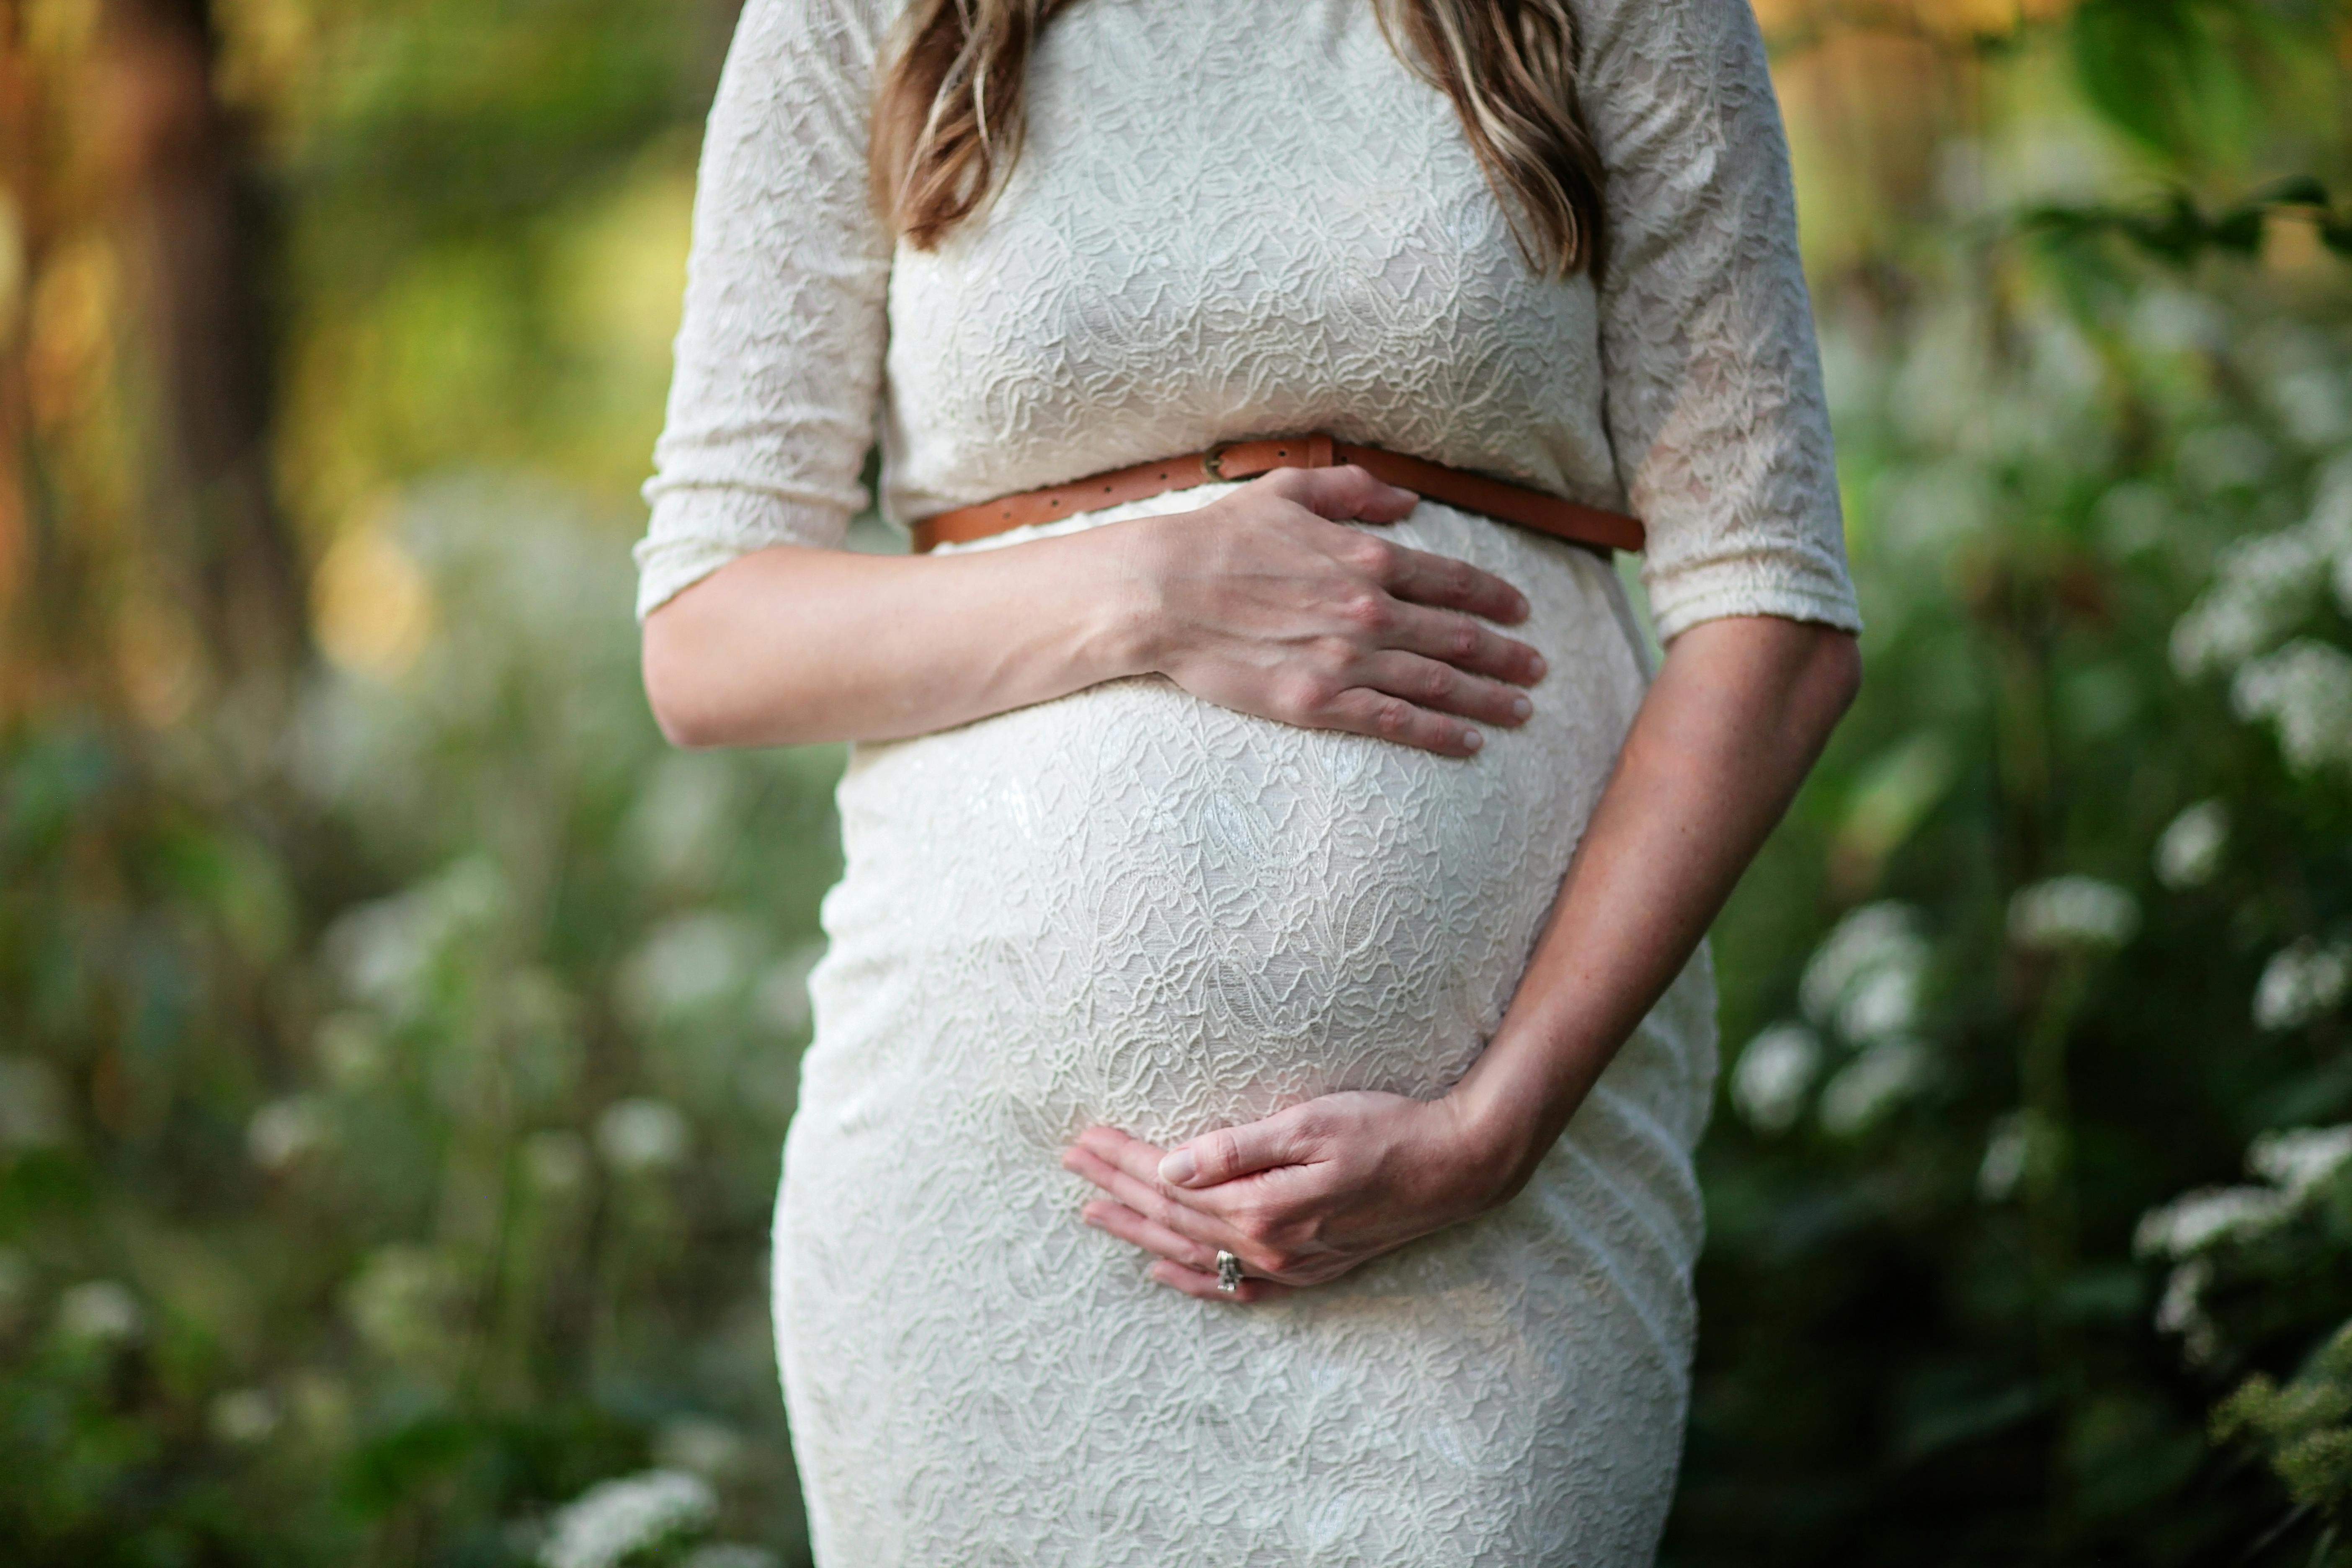 A pregnant woman cradling her baby bump | Source: Pexels